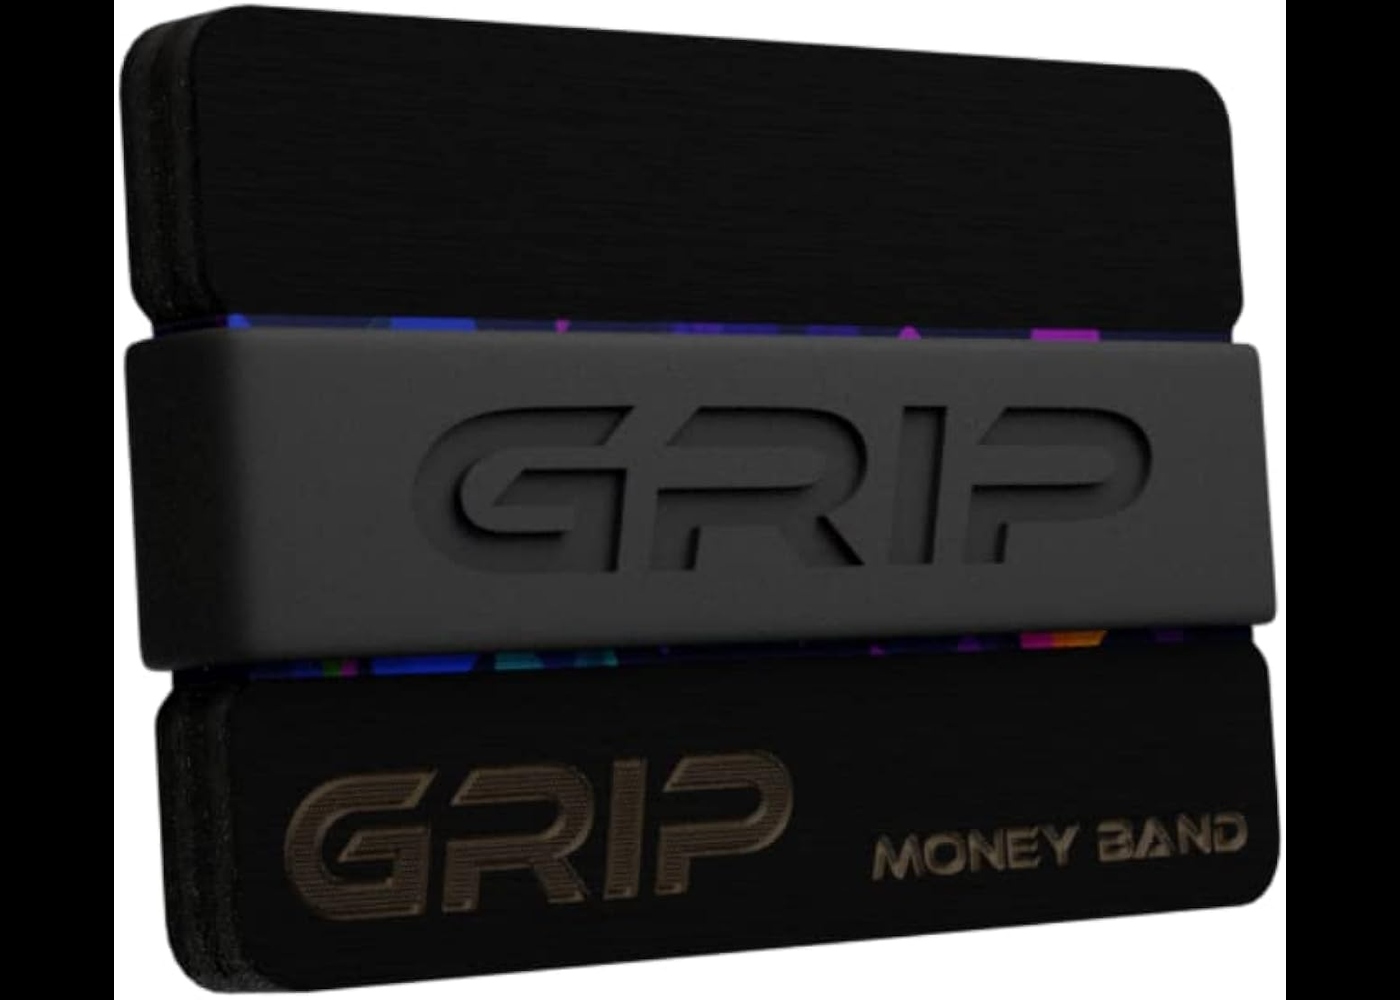  Silicone Minimalist Wallet Bands | Grip Money Official | 100% USA-Made